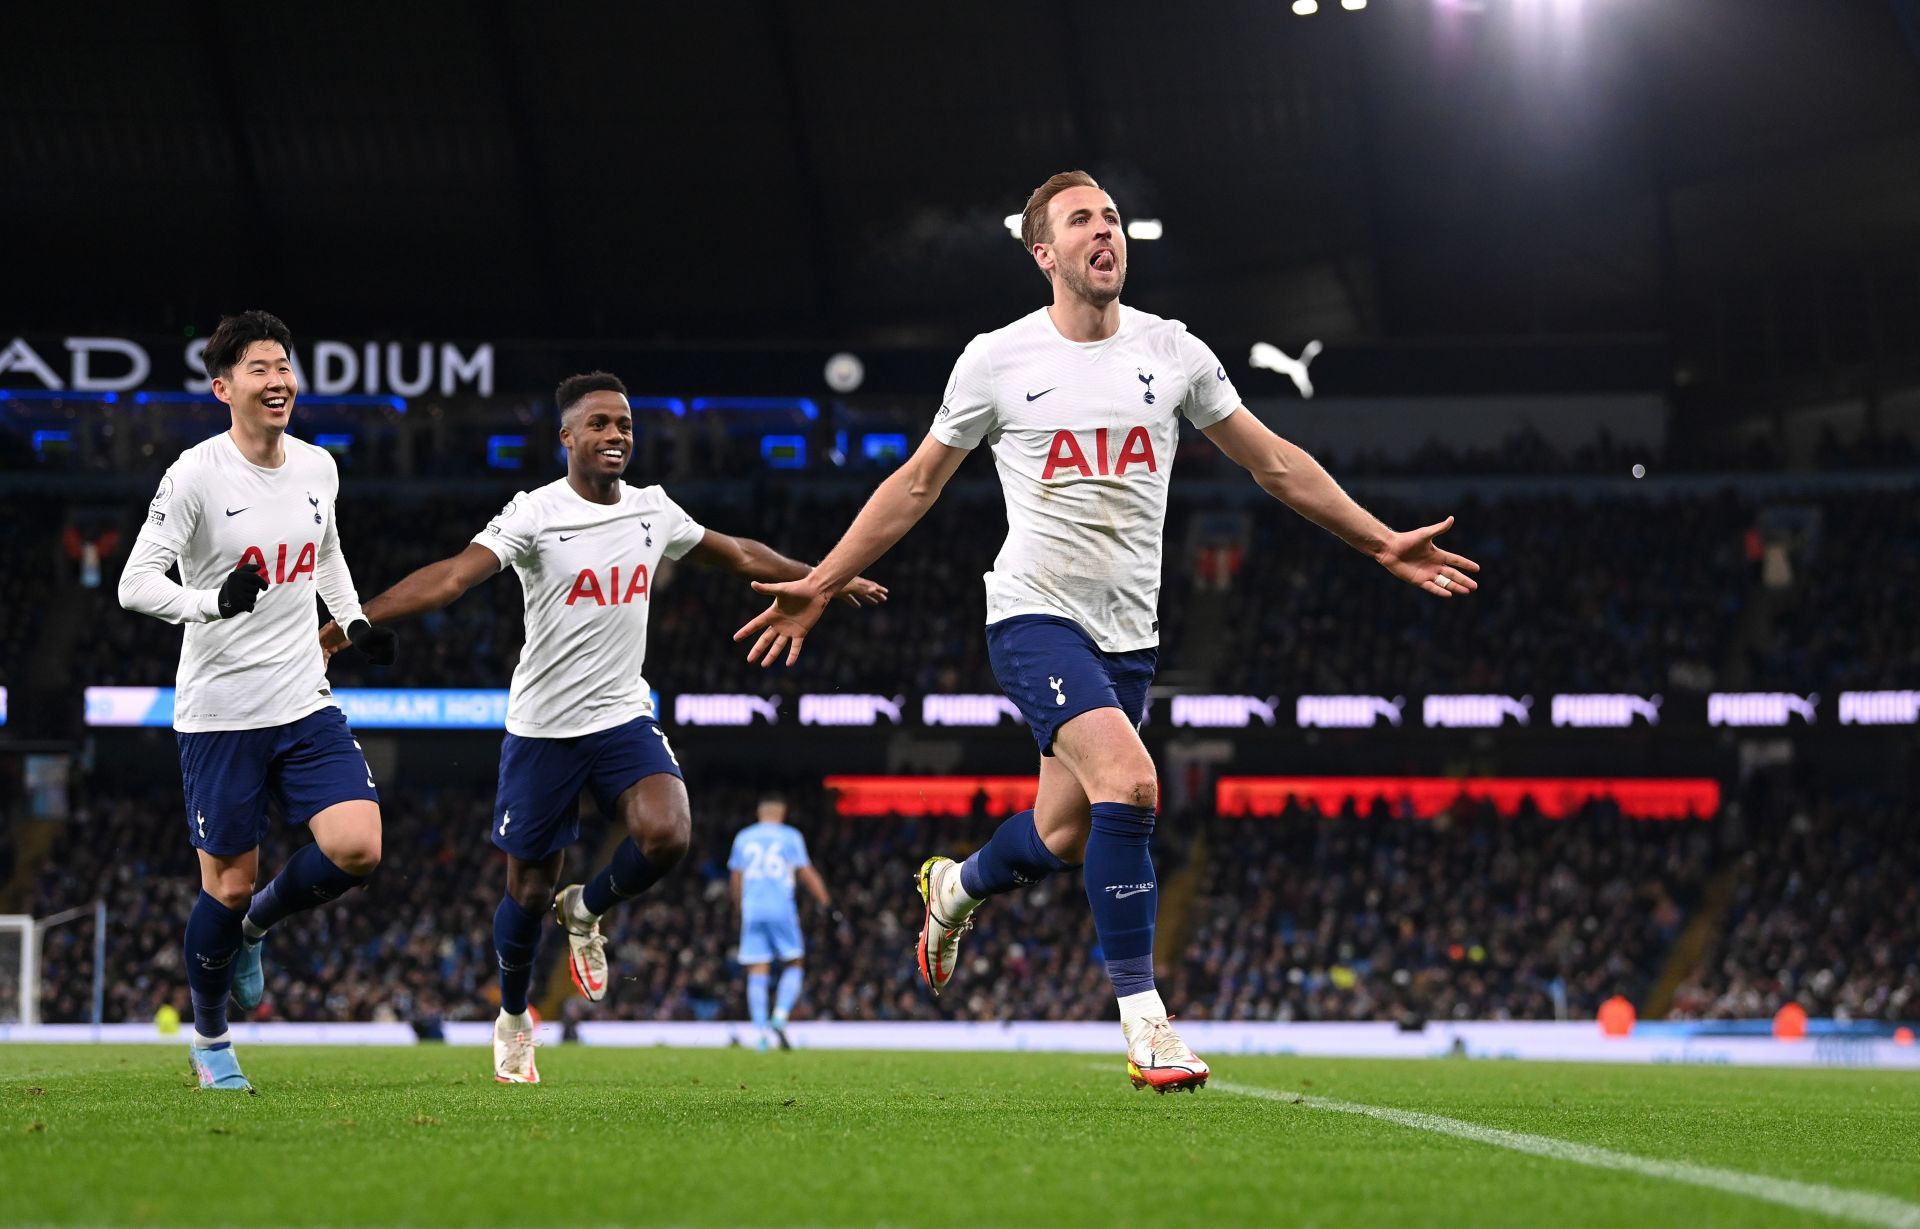 Tottenham will be looking to bounce back from their loss